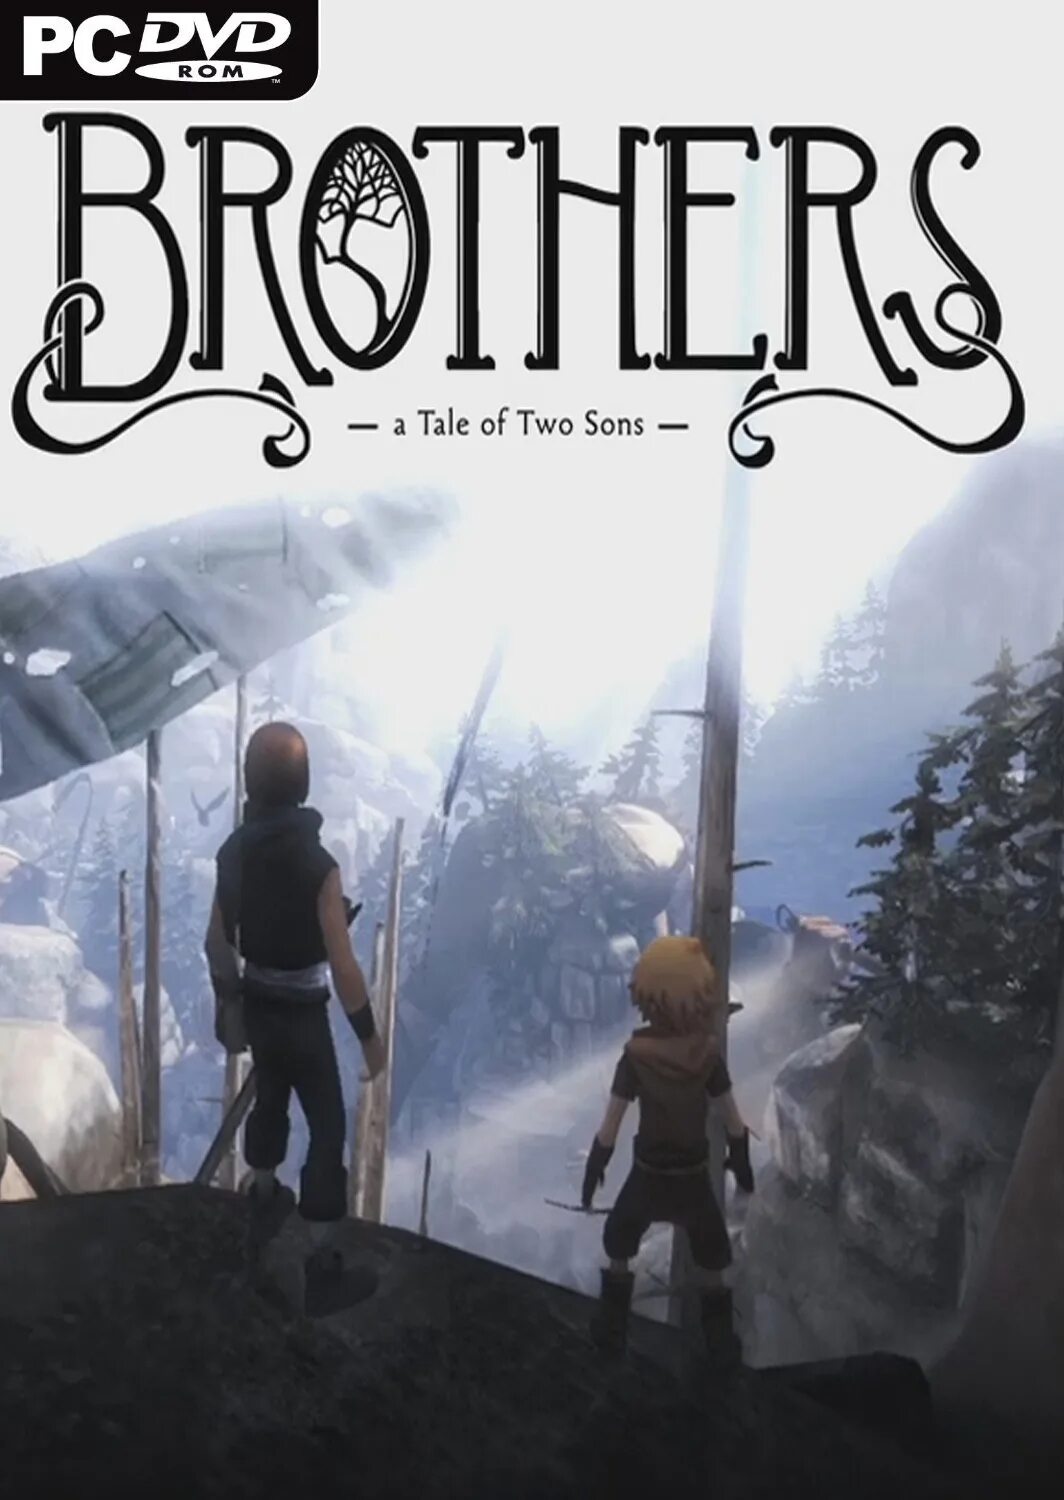 2 brothers game. Игра brothers a Tale of two sons. Brothers a Tale of two sons ps4. Brothers: a Tale of two sons (2013). Brothers: a Tale of two sons Xbox 360.